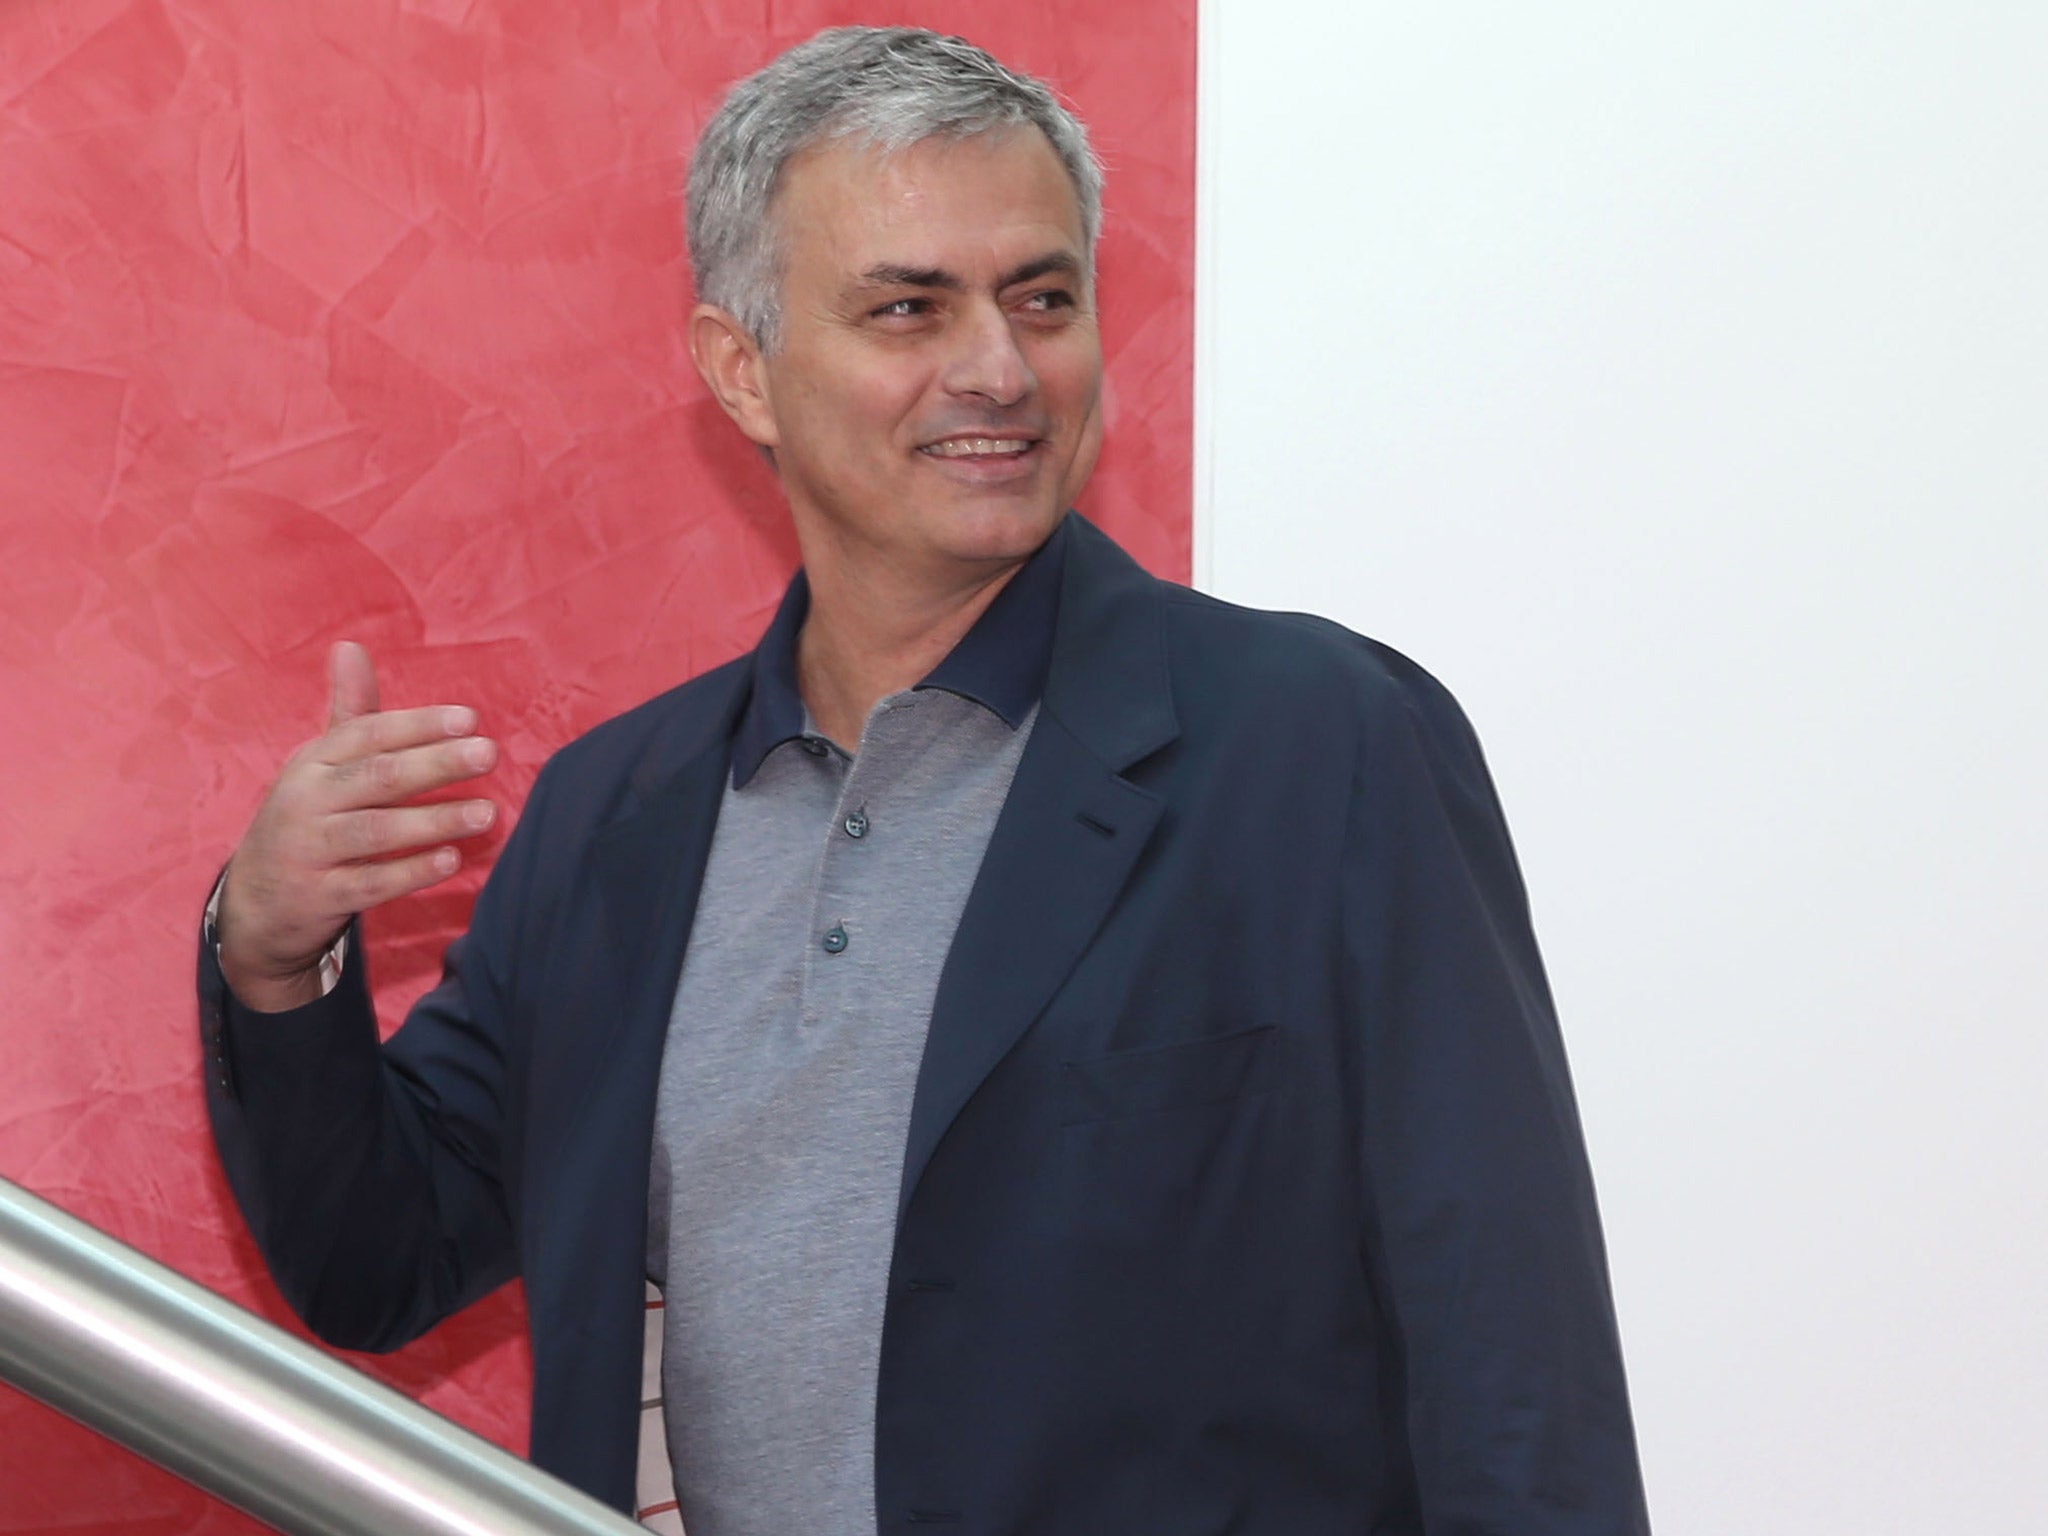 Jose Mourinho has pulled out of this weekend's Unicef charity match at Old Trafford